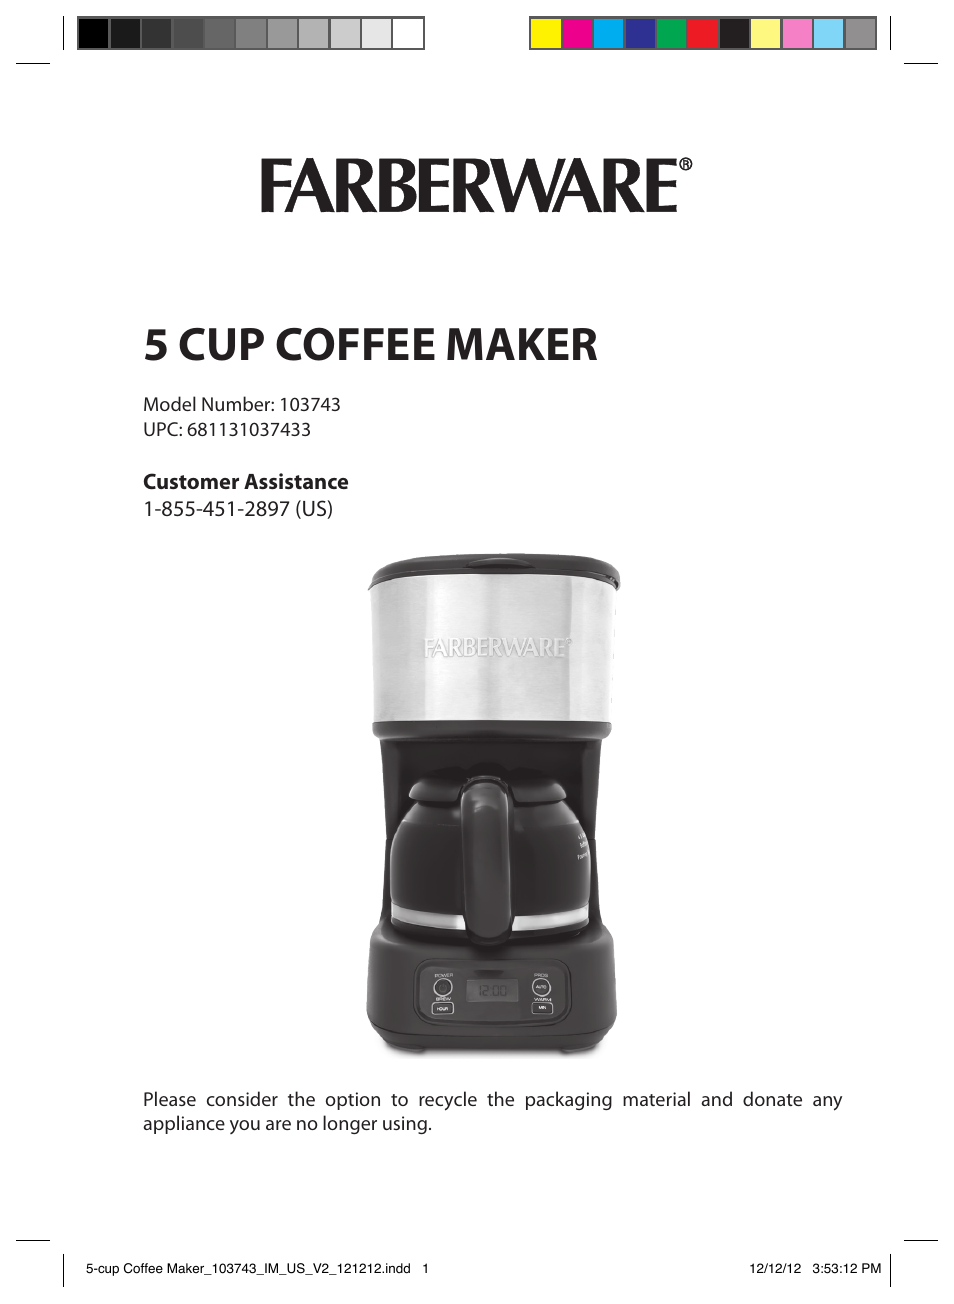 FARBERWARE 103743 5 Cup Coffee Maker User Manual | 15 pages